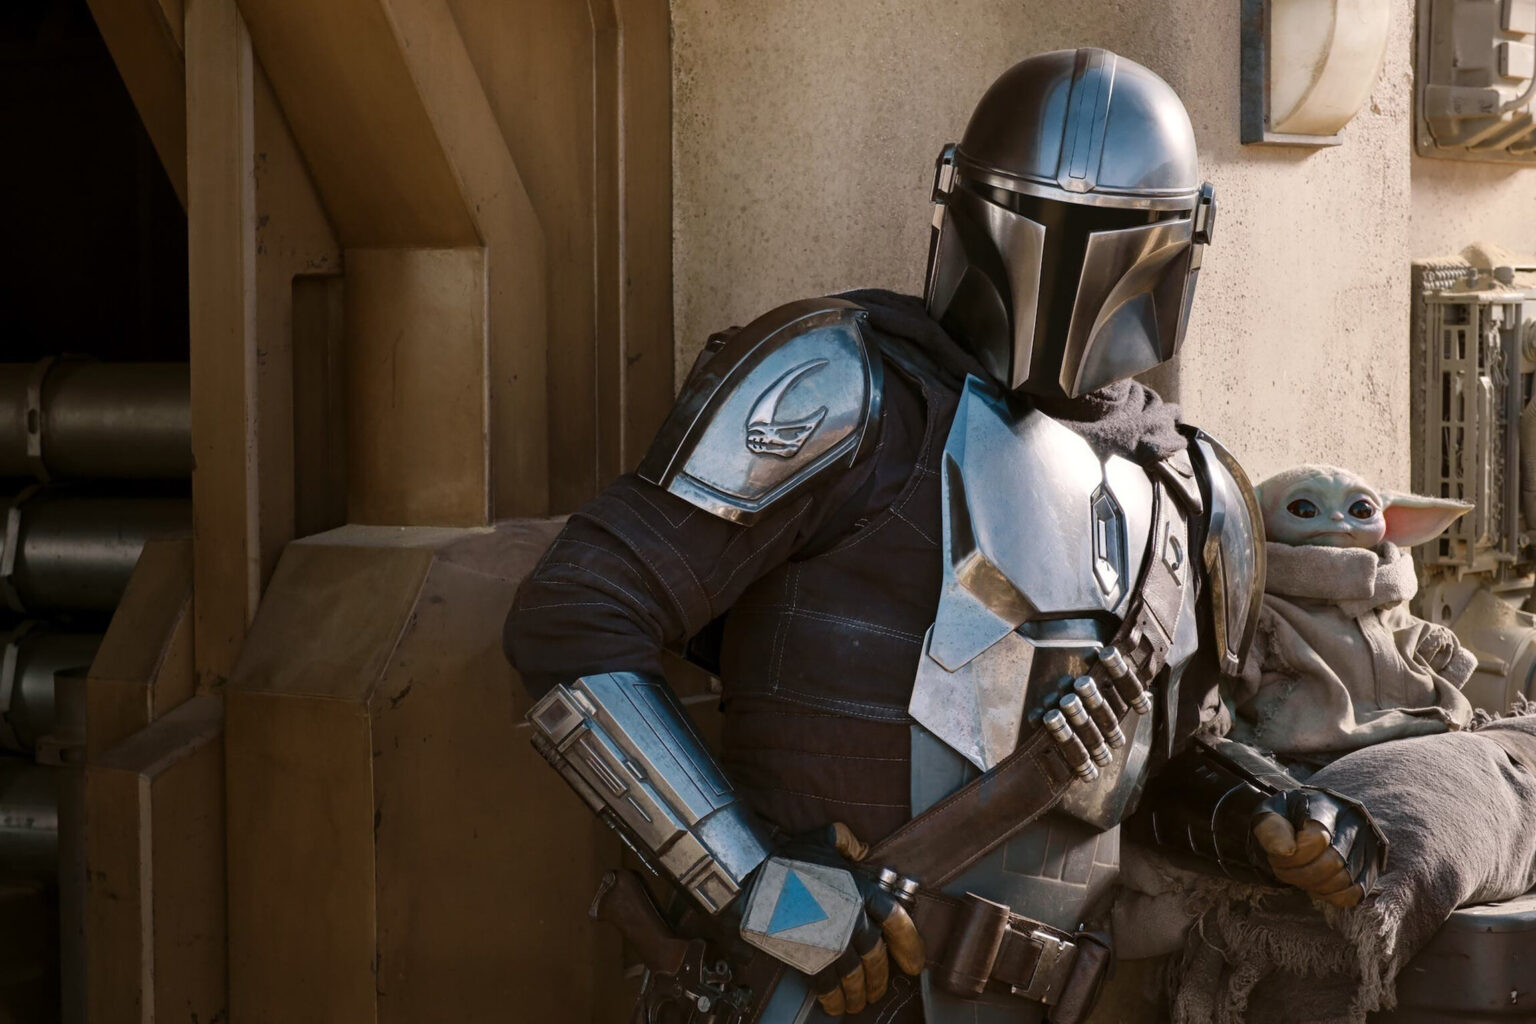 The season 2 trailer for 'The Mandalorian' is here, and we can't stop watching it. Here are our predictions for season 2 based off of the exciting trailer.